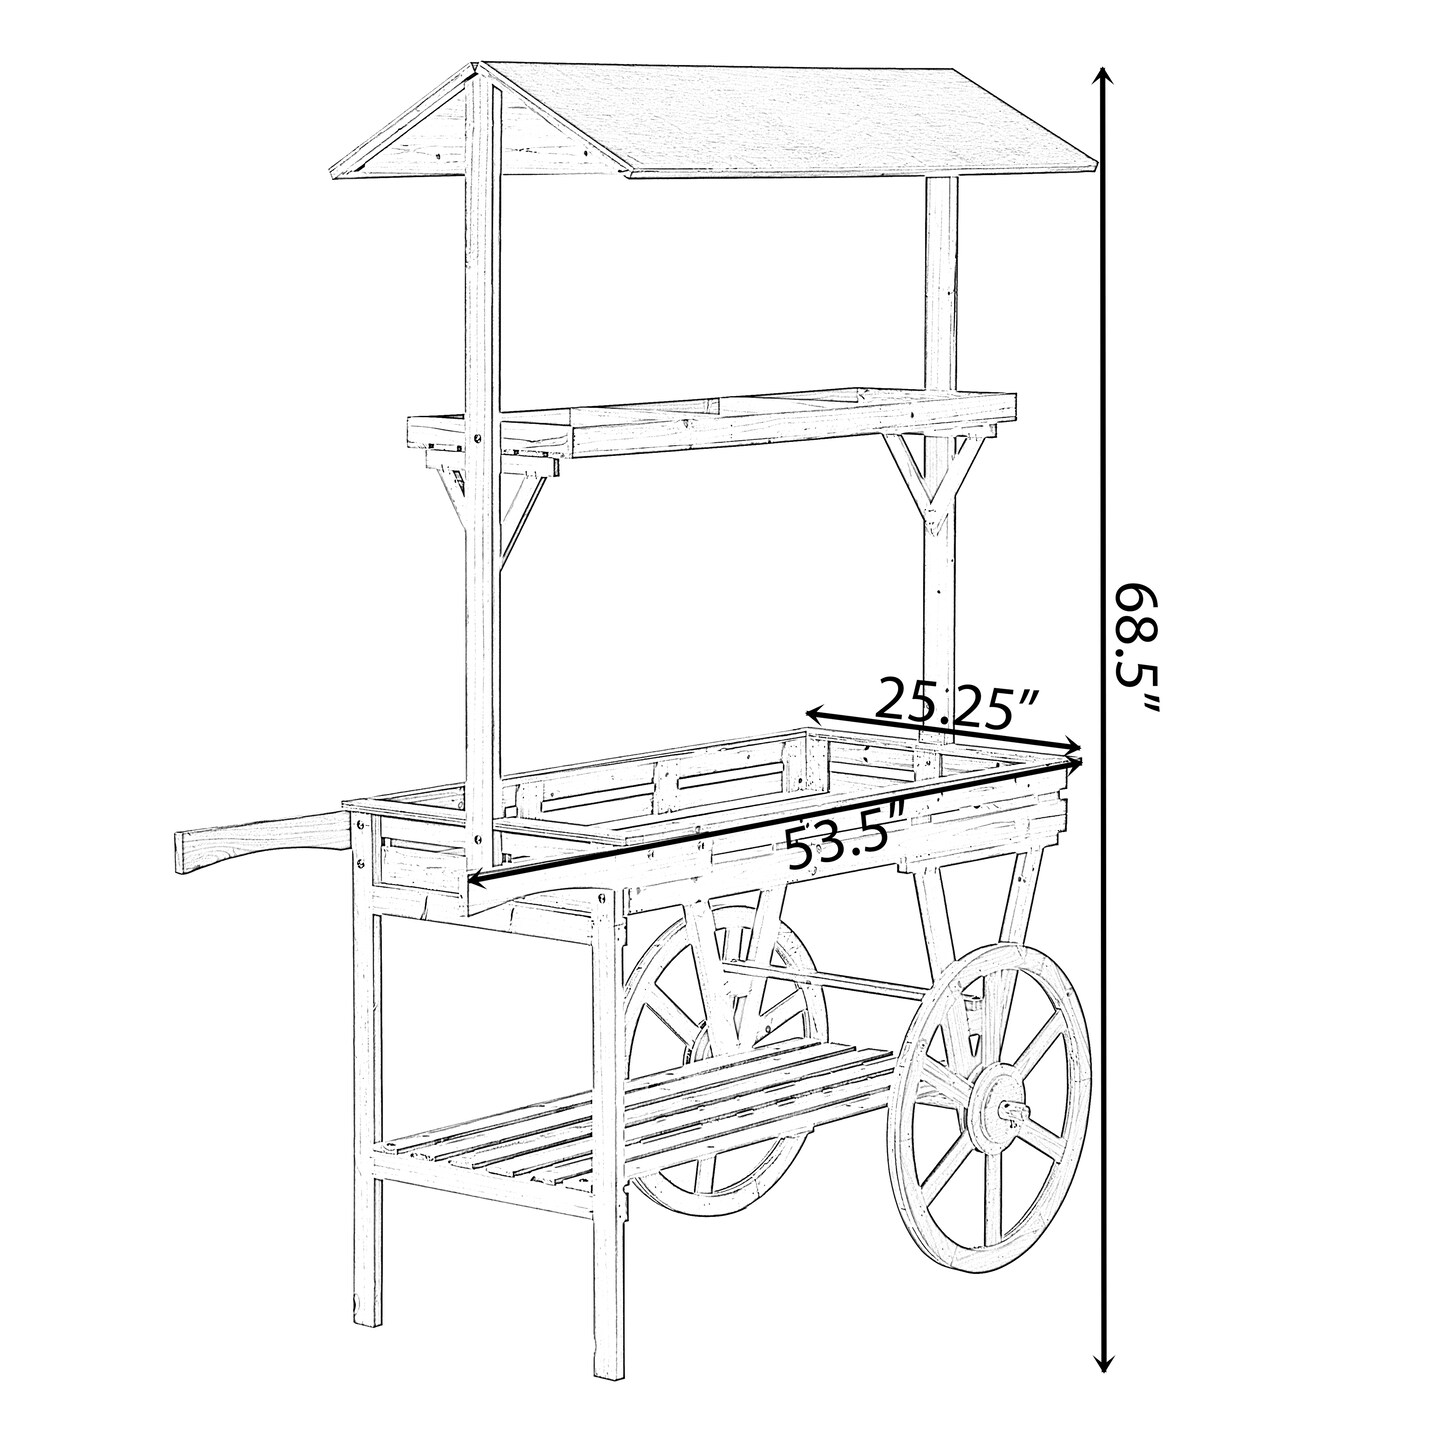 Large Wooden 3 Tier Rolling Table Cart with 2 Wheels for Home Decor Modern Wagon with Shelves for Display Rack, Coffee Station, Food Stand, Beverage Bar, and Tea Stall